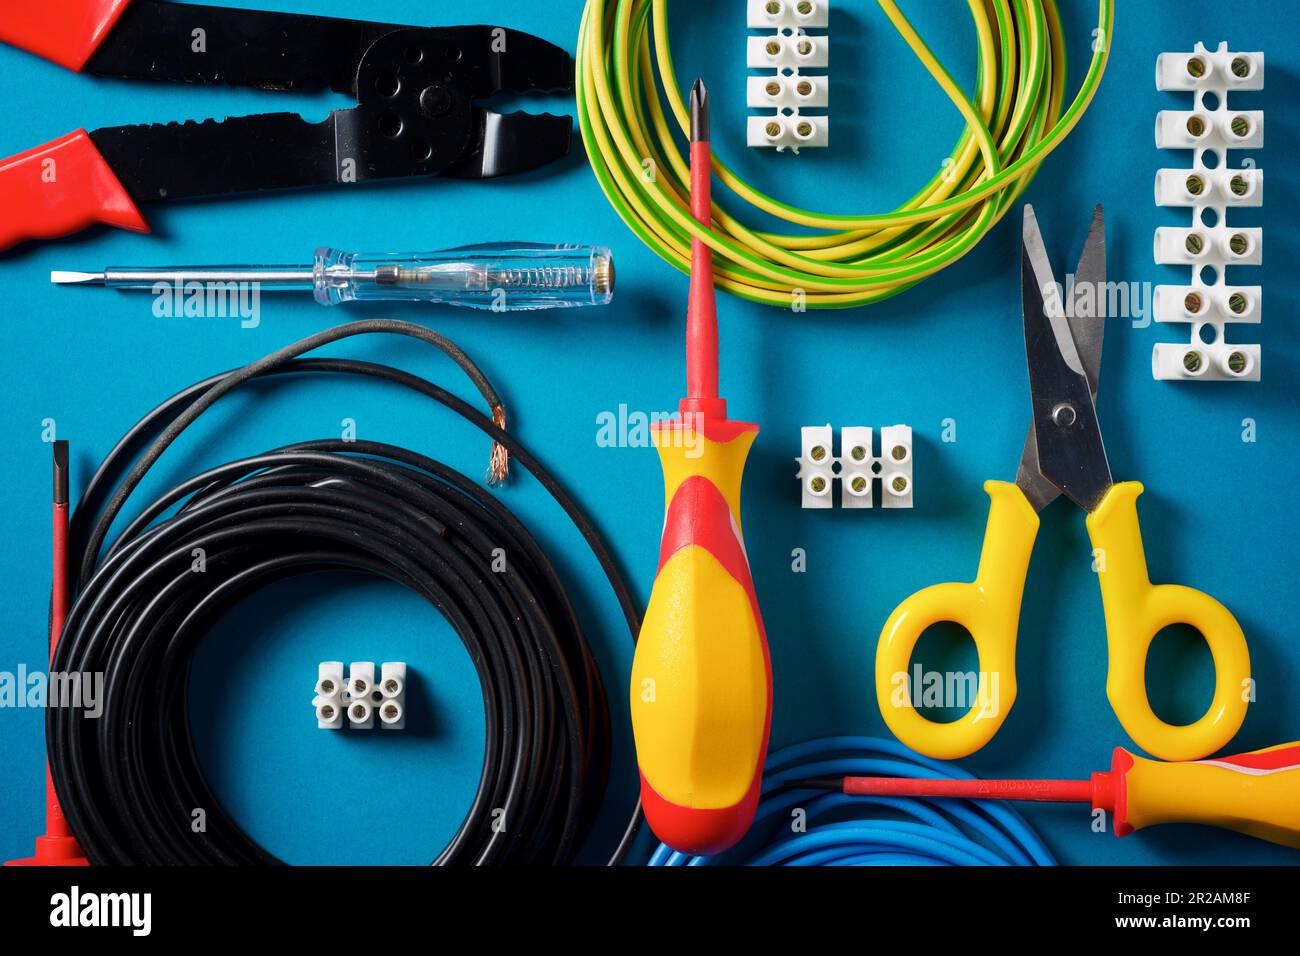 Electrician tools for various jobs on a blue table Stock Photo - Alamy